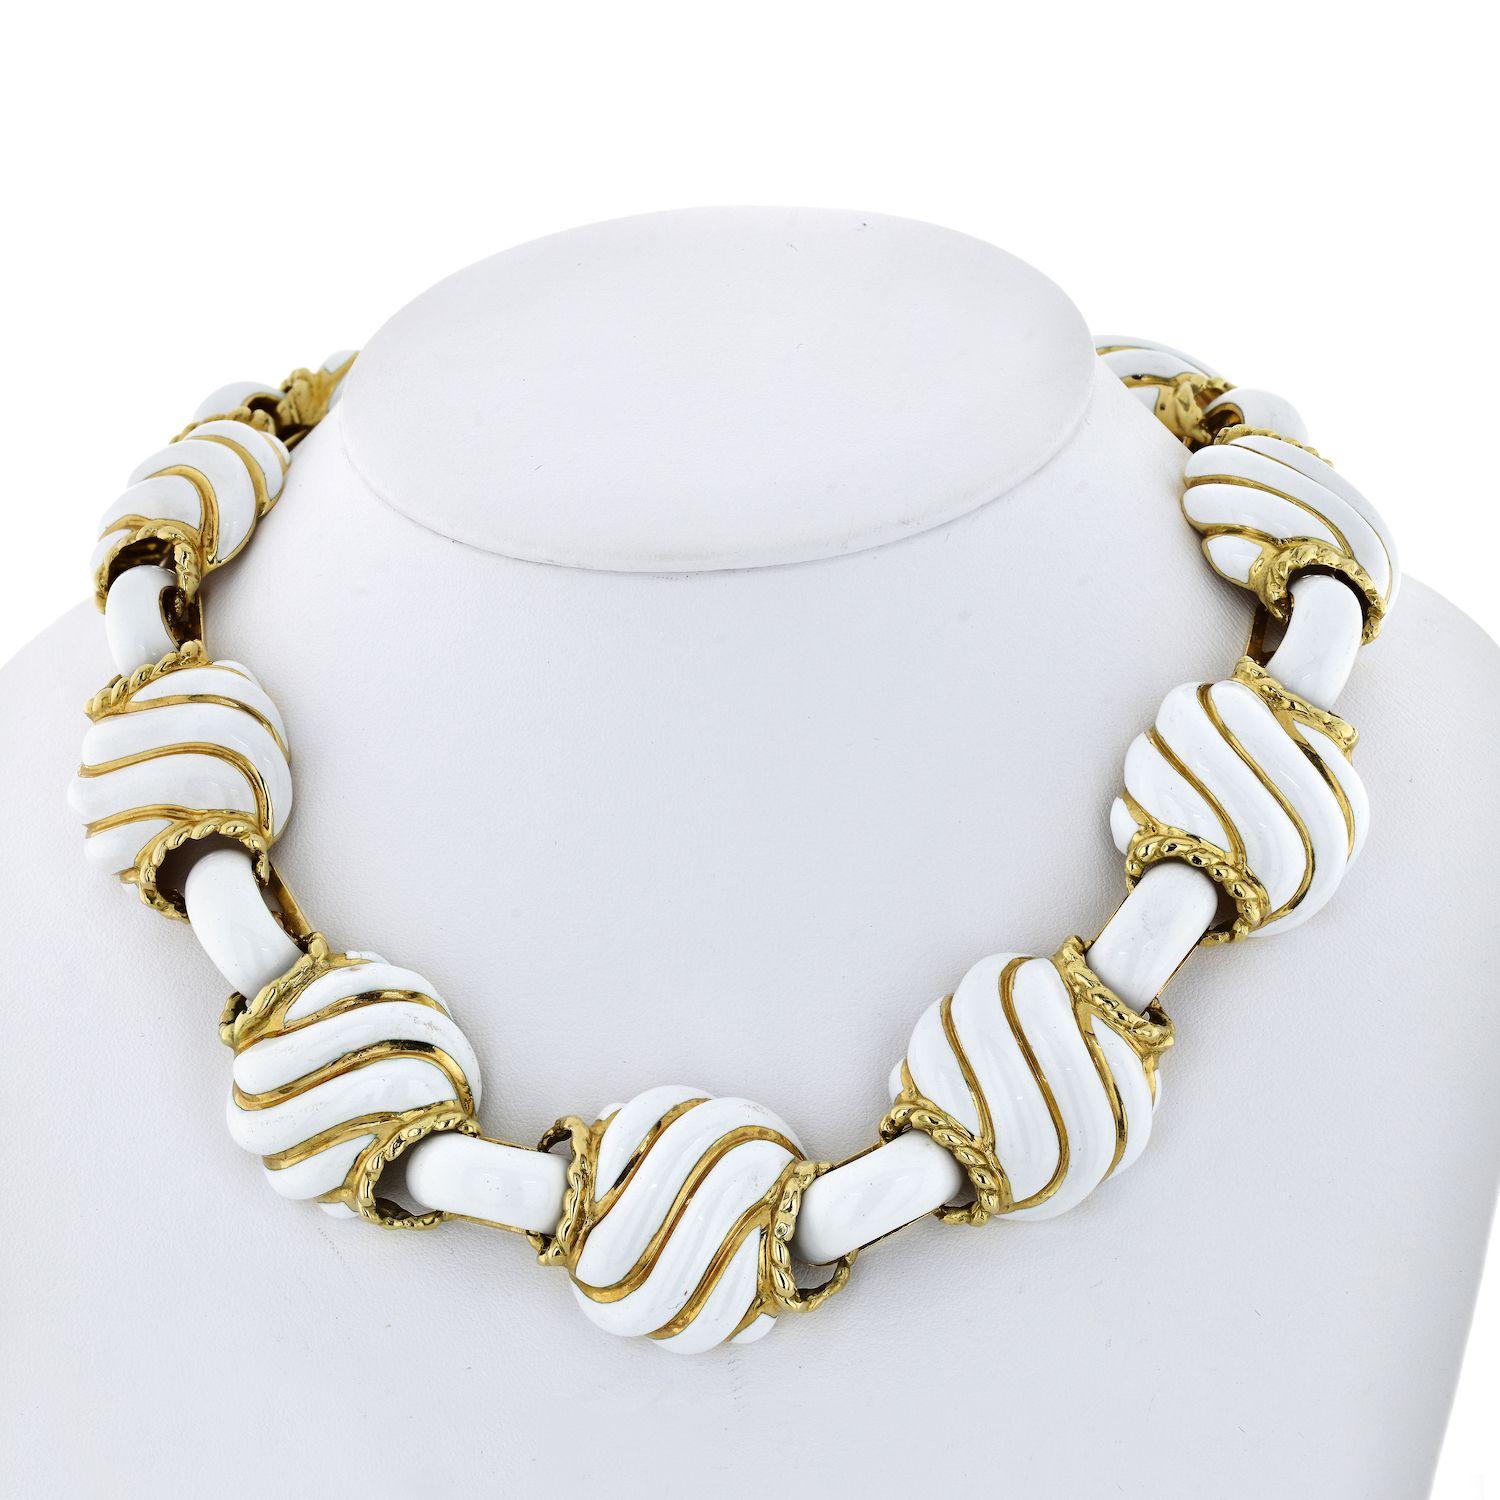 Beautiful and bold this 18K Yellow Gold David Webb Collapsible White Enamel Choker will become your favorite necklace. 
This necklace collapses into two bracelets. Wear it as you please, everyone will think you are a savvy David Webb collector.